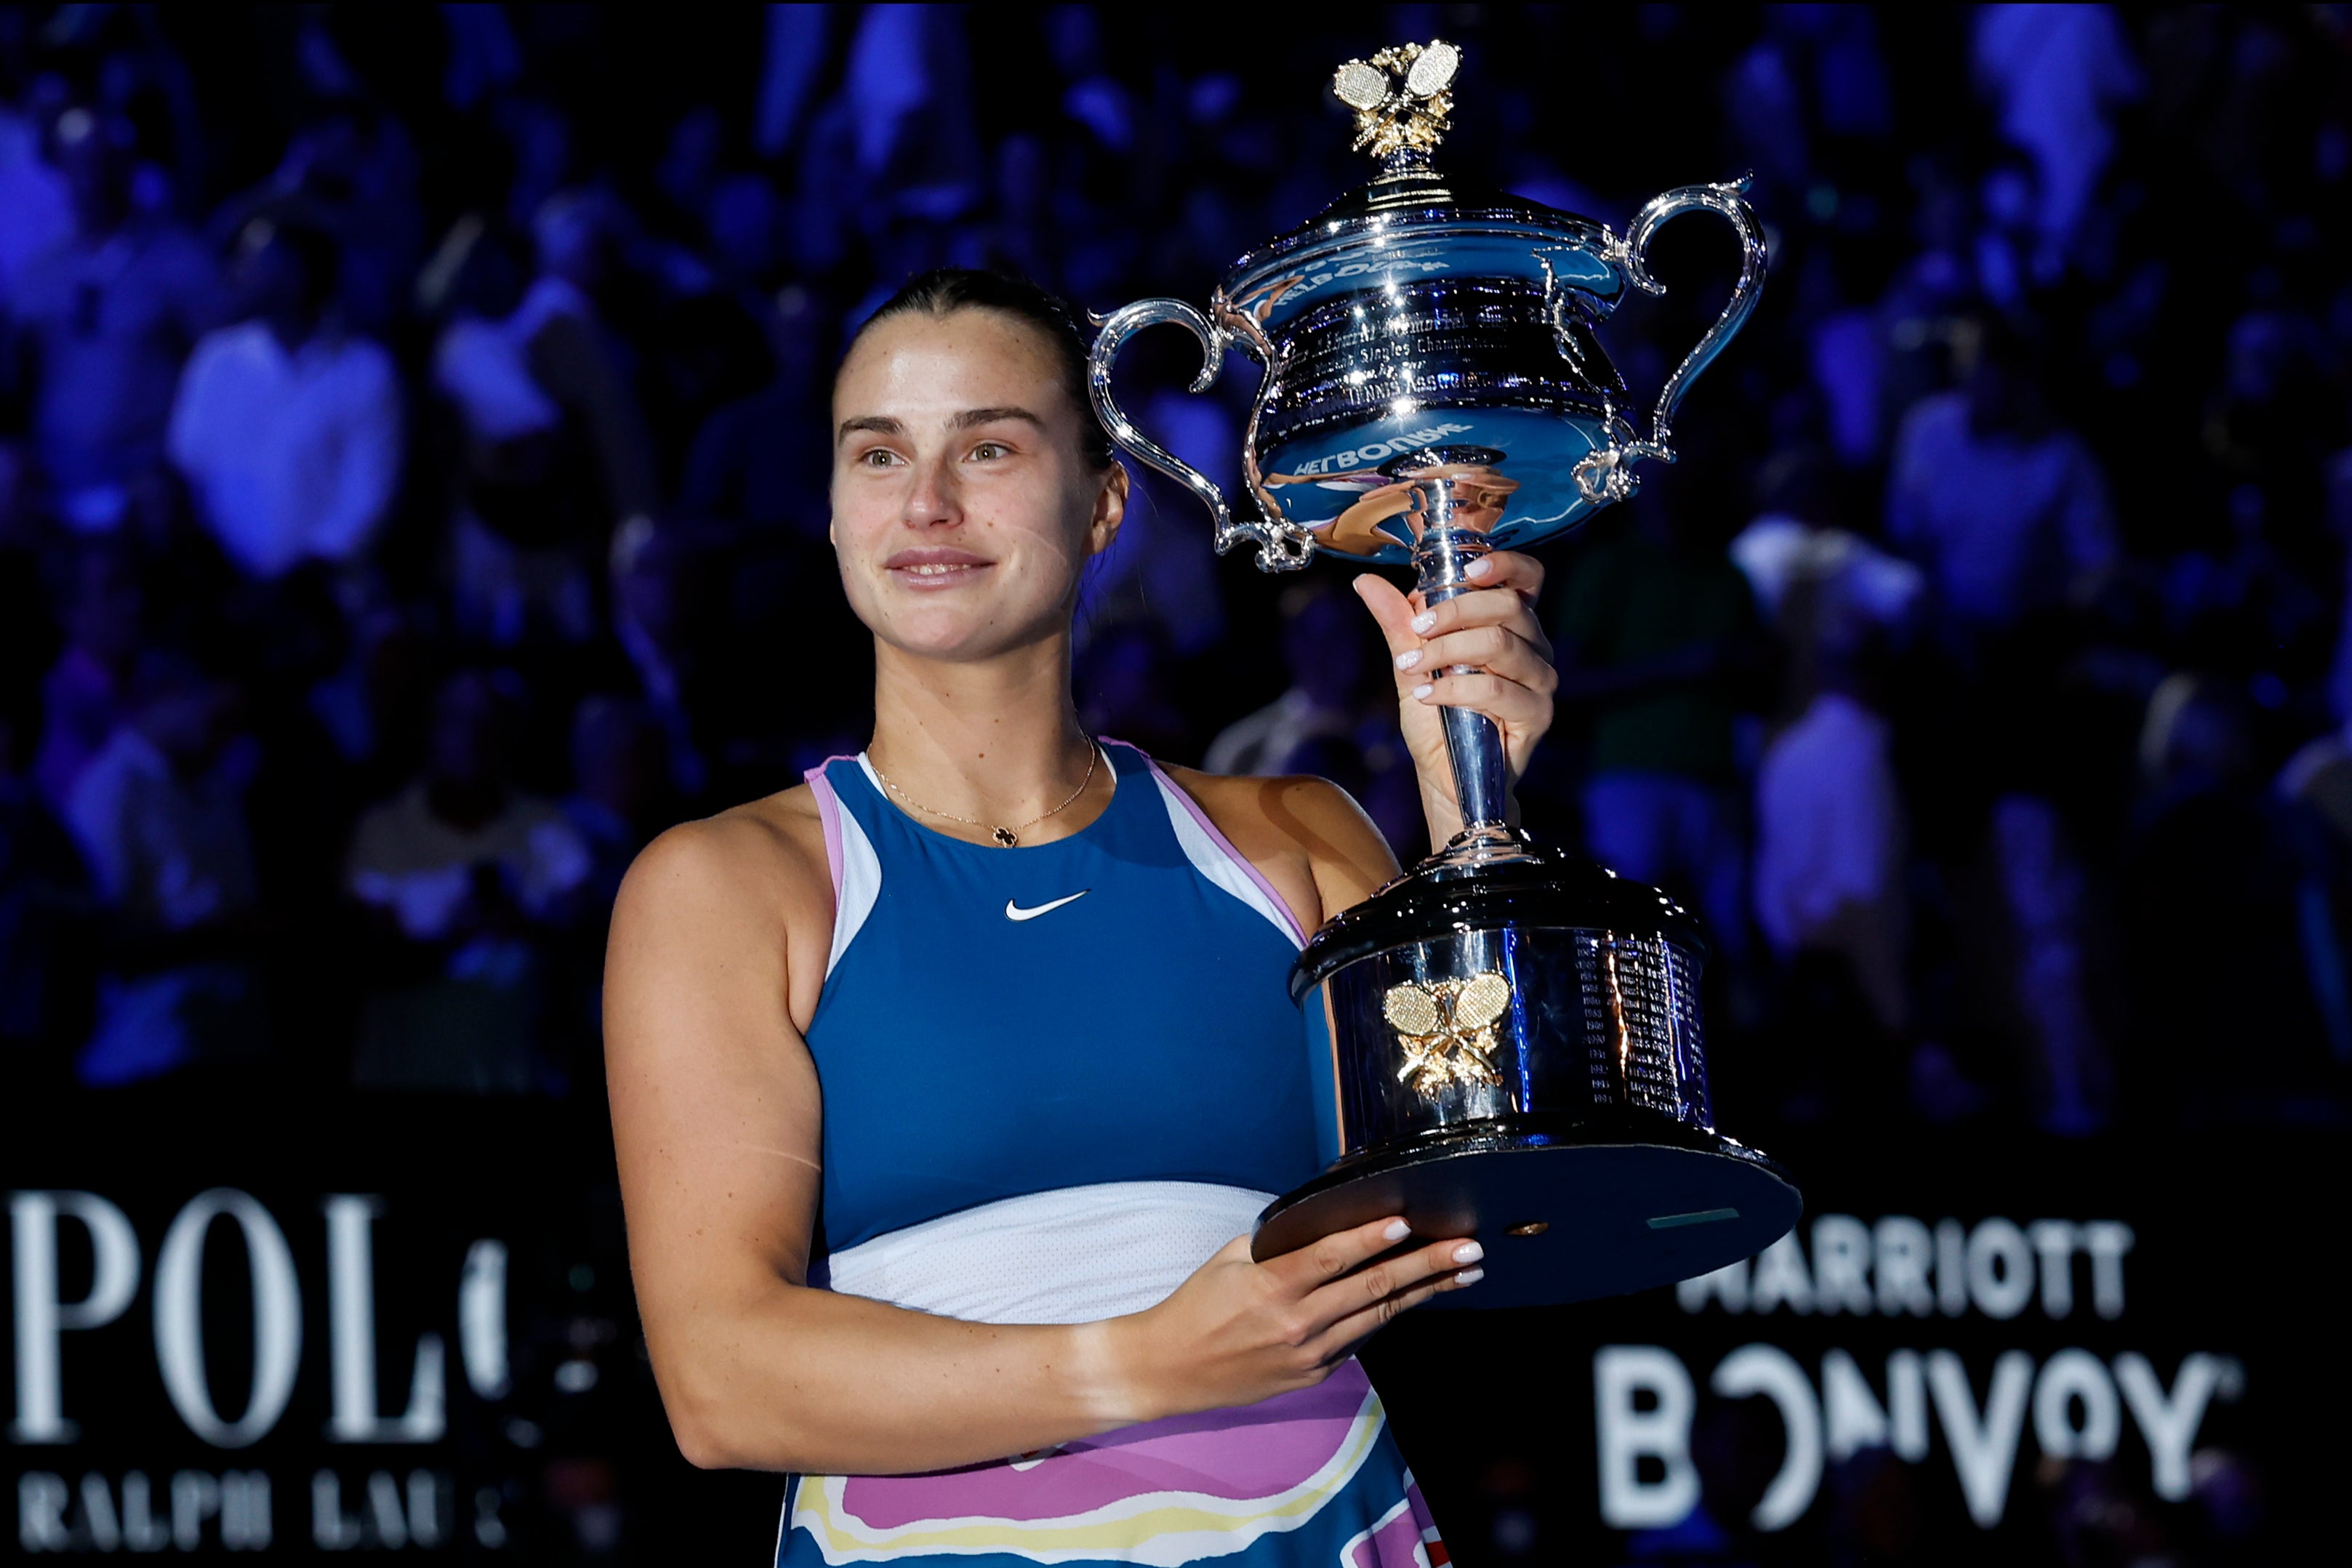 Aryna Sabalenka secured her first Grand Slam title in Melbourne last year